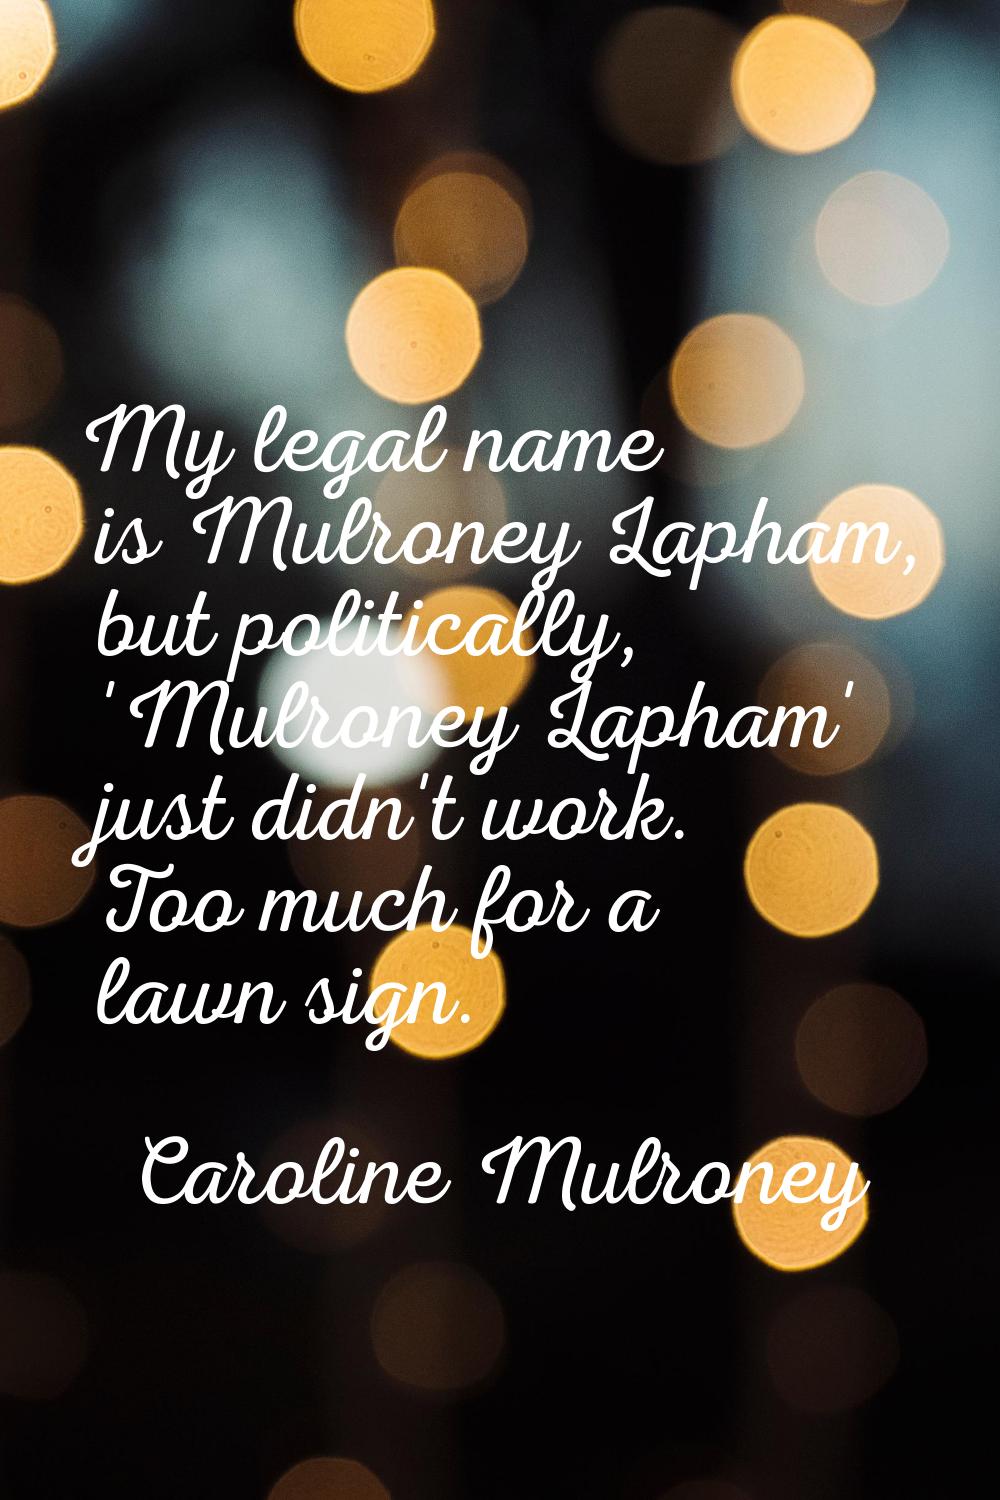 My legal name is Mulroney Lapham, but politically, 'Mulroney Lapham' just didn't work. Too much for